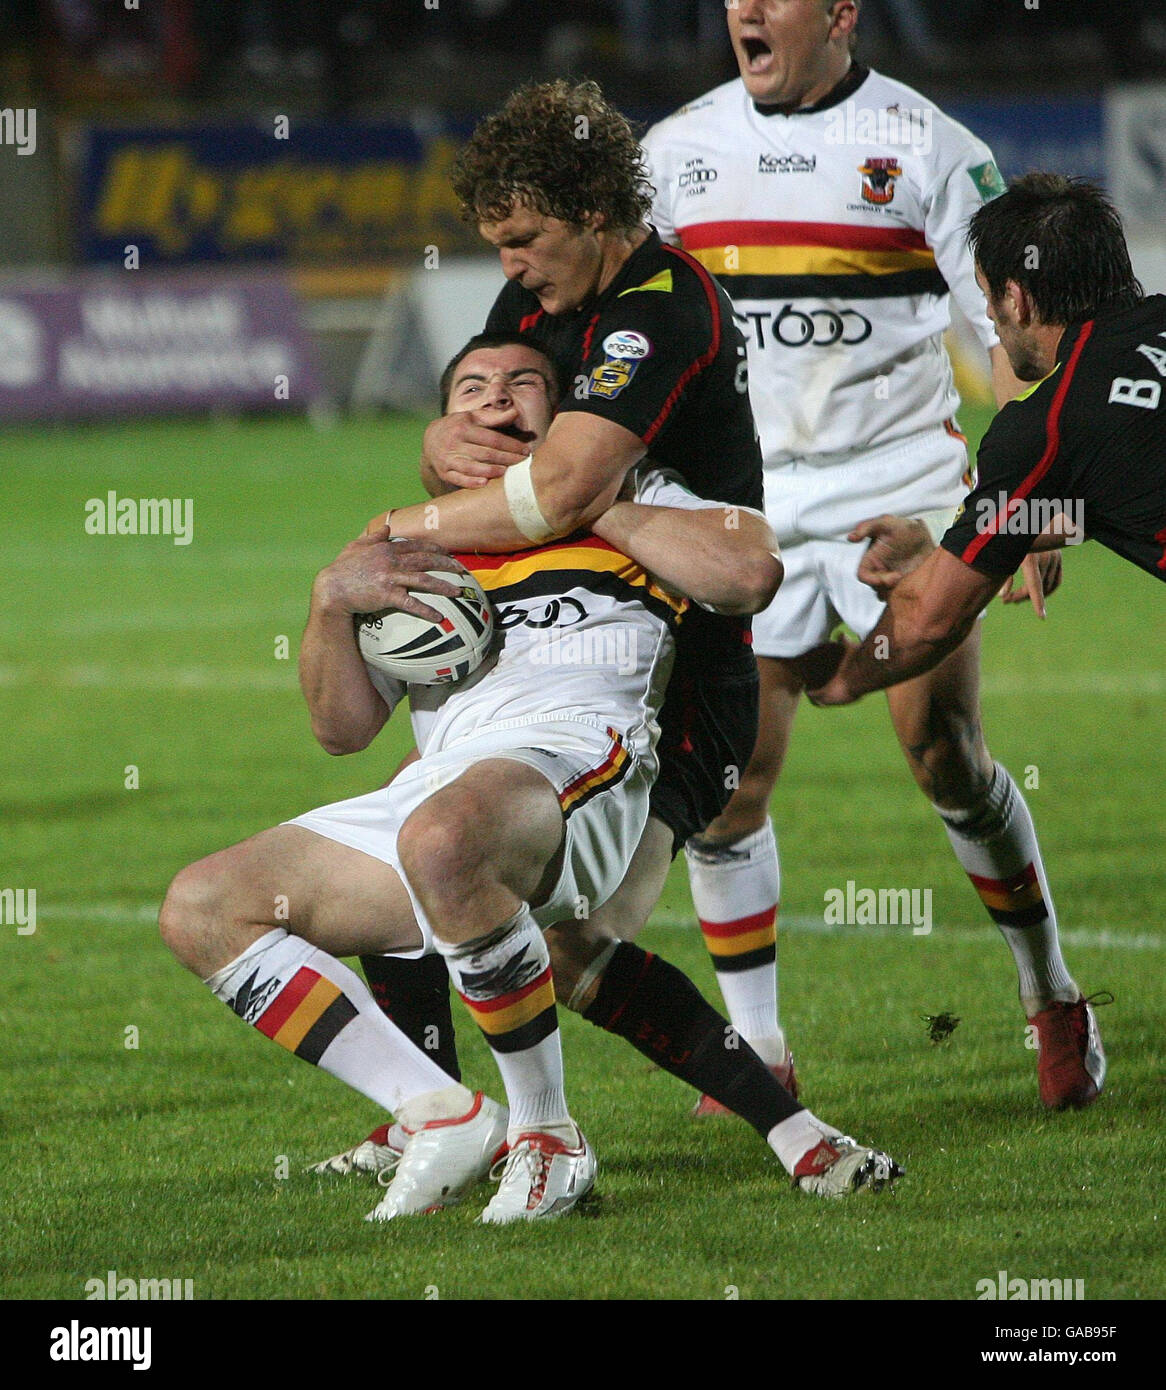 Wigan's Sean O'Loughlin catches Bradford Bulls' Iestyn Harris with a high tackle during the Engage Super League Elimination play-off match at Grattan Stadium, Odsal, Bradford. Stock Photo